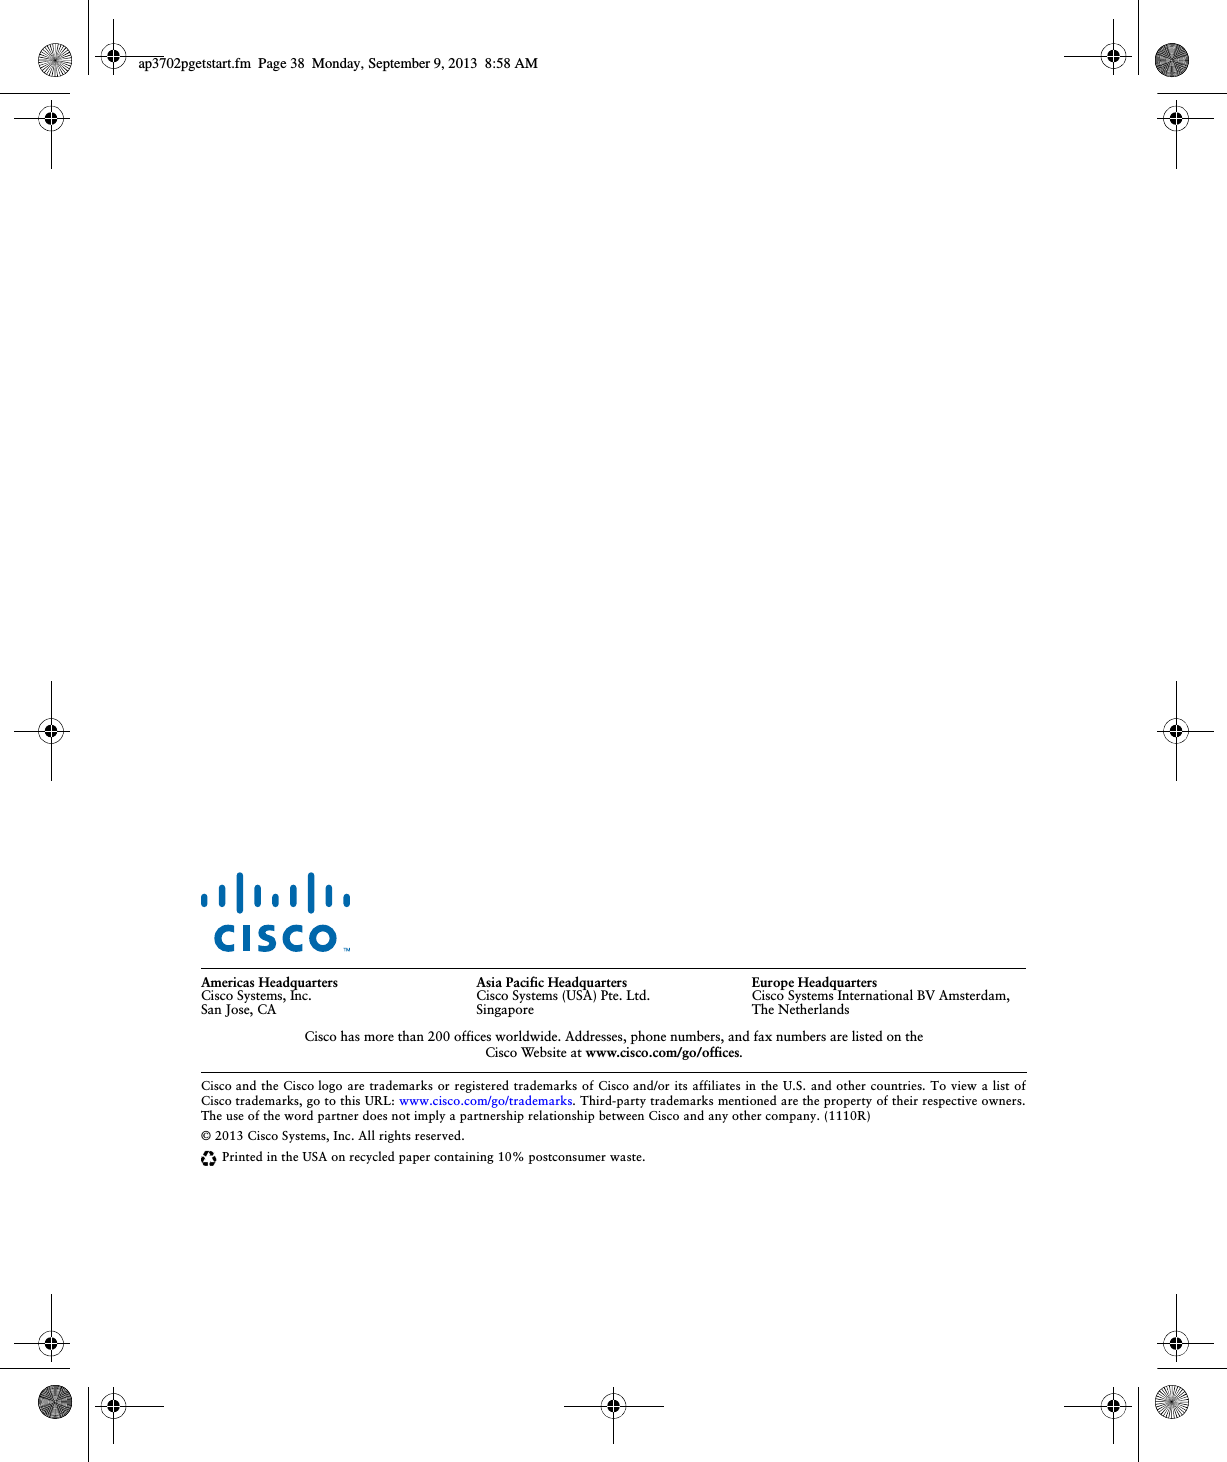  Cisco and the Cisco logo are trademarks or registered trademarks of Cisco and/or its affiliates in the U.S. and other countries. To view a list of Cisco trademarks, go to this URL: www.cisco.com/go/trademarks. Third-party trademarks mentioned are the property of their respective owners. The use of the word partner does not imply a partnership relationship between Cisco and any other company. (1110R)© 2013 Cisco Systems, Inc. All rights reserved.Printed in the USA on recycled paper containing 10% postconsumer waste.Americas HeadquartersCisco Systems, Inc.San Jose, CAAsia Pacific HeadquartersCisco Systems (USA) Pte. Ltd.SingaporeEurope HeadquartersCisco Systems International BV Amsterdam,  The NetherlandsCisco has more than 200 offices worldwide. Addresses, phone numbers, and fax numbers are listed on the  Cisco Website at www.cisco.com/go/offices.ap3702pgetstart.fm  Page 38  Monday, September 9, 2013  8:58 AM